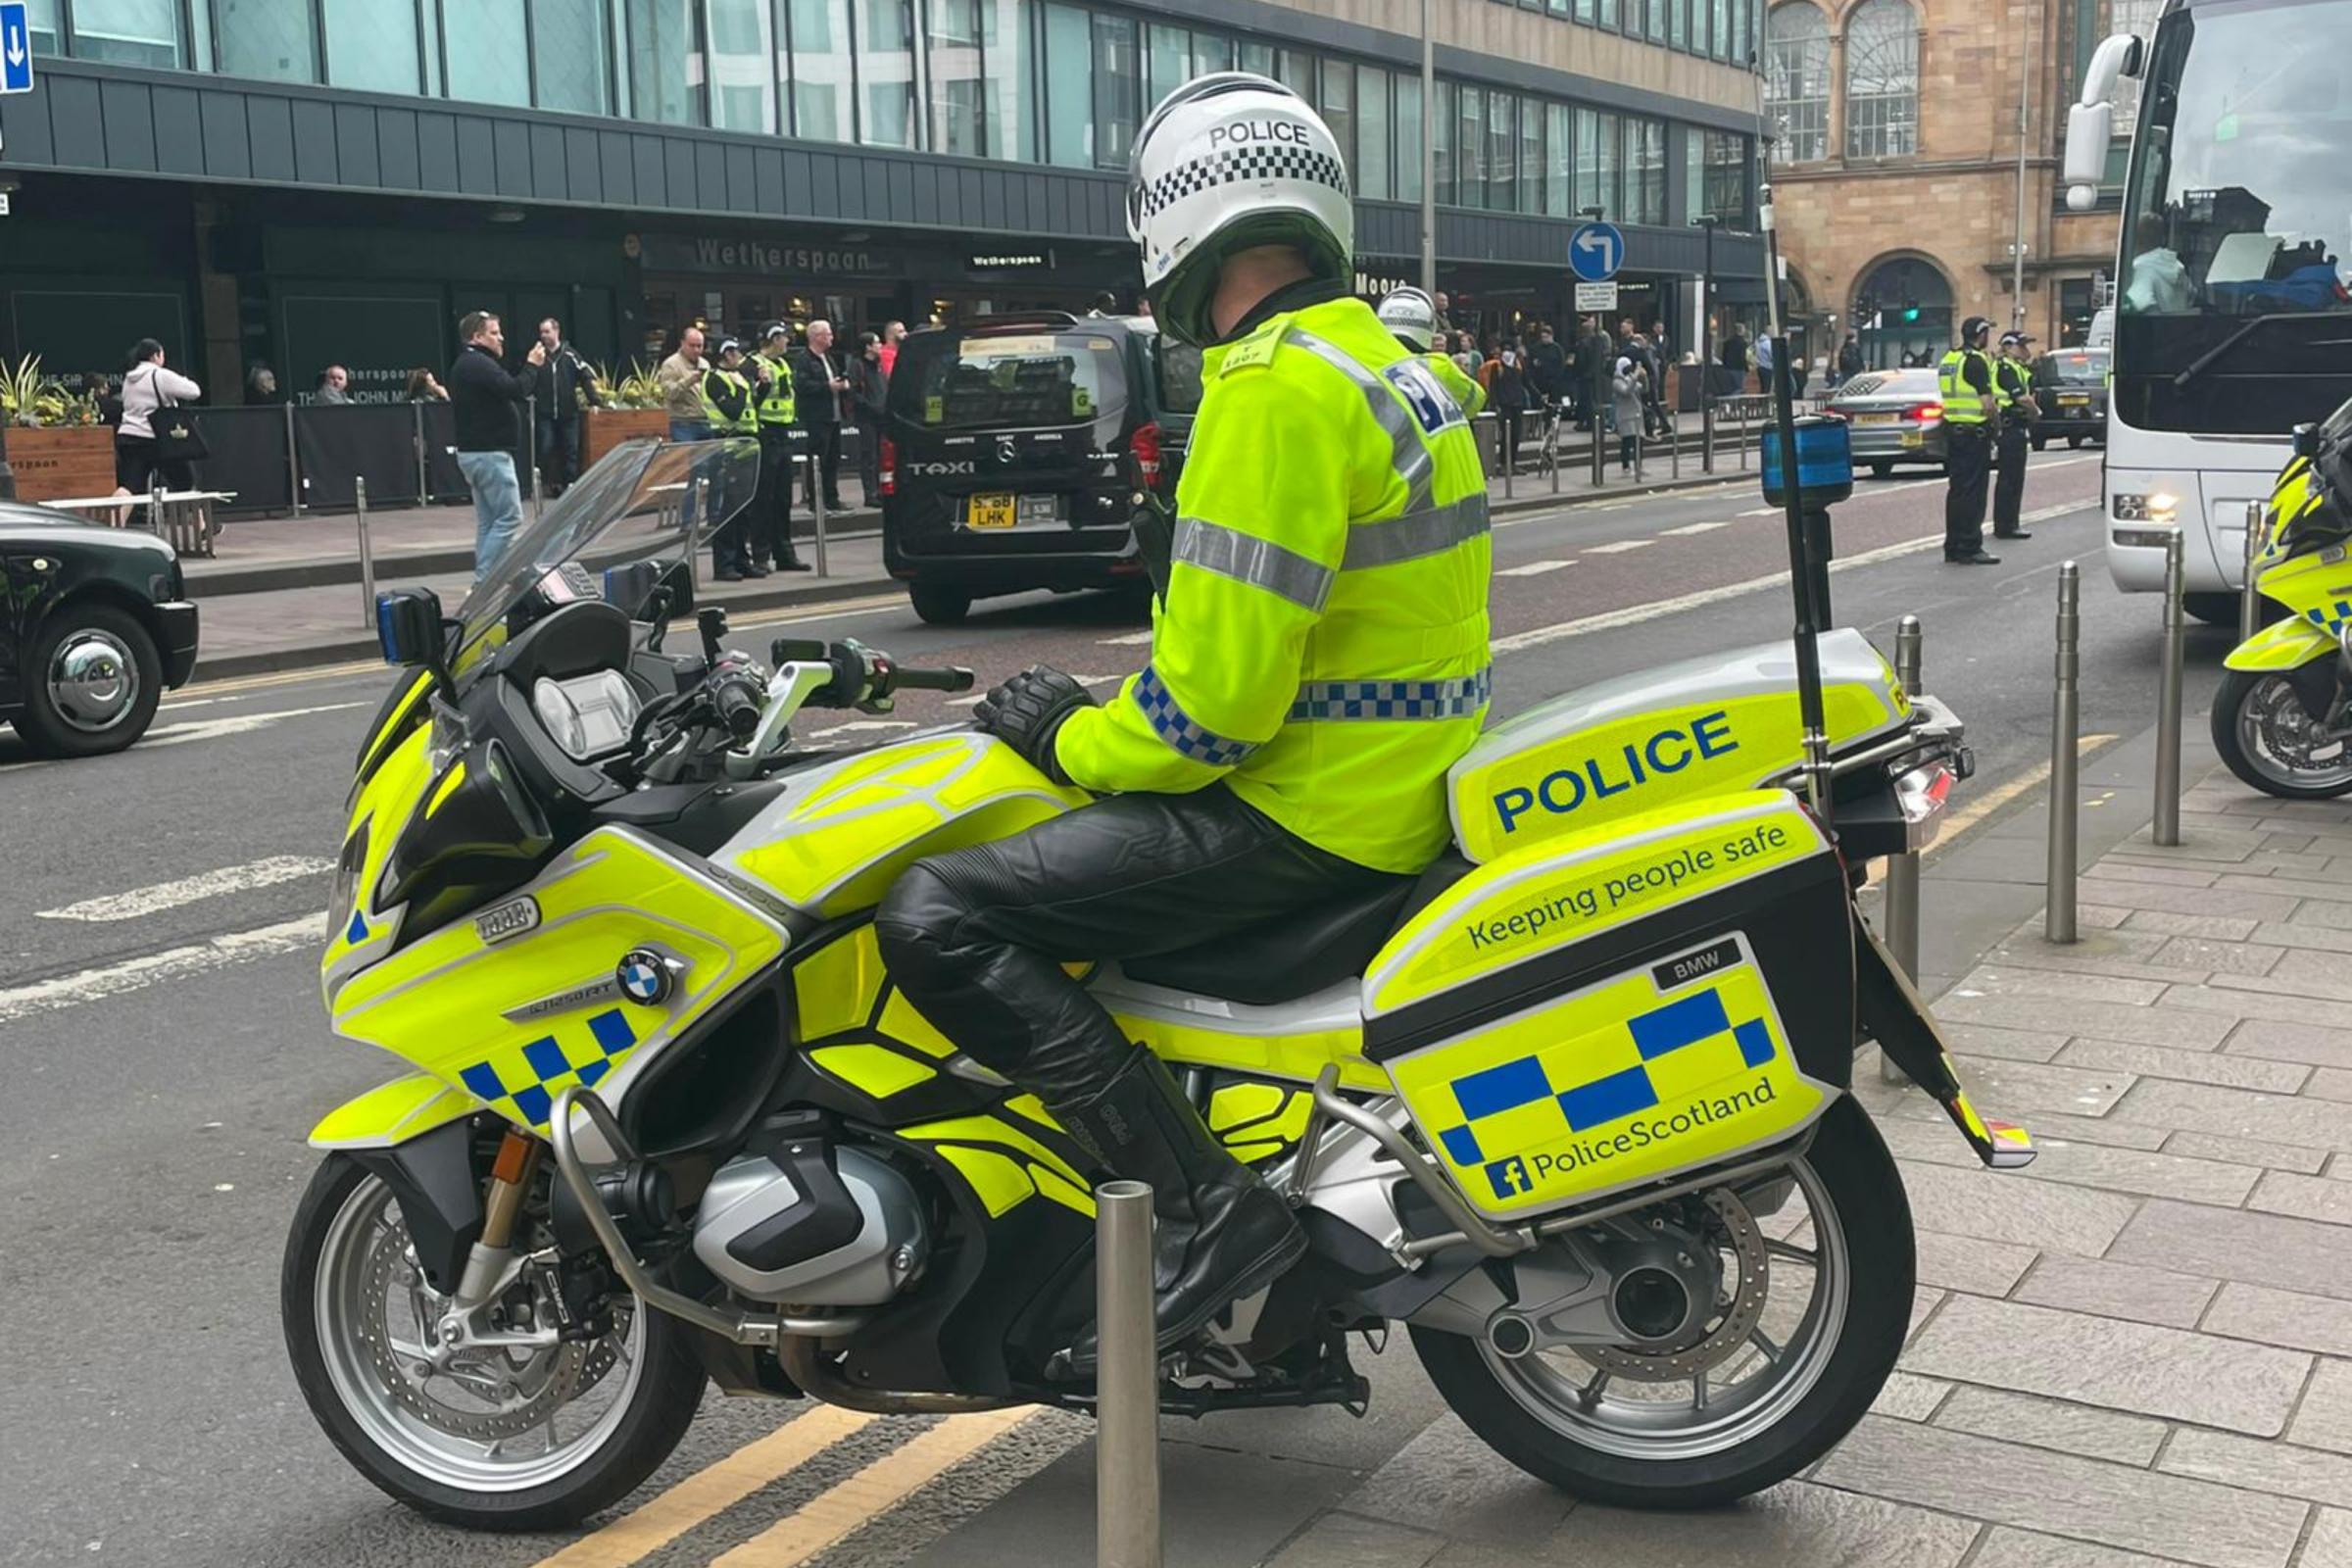 Police urge motorcyclists in Scotland to be responsible to ensure they 'get home safe'